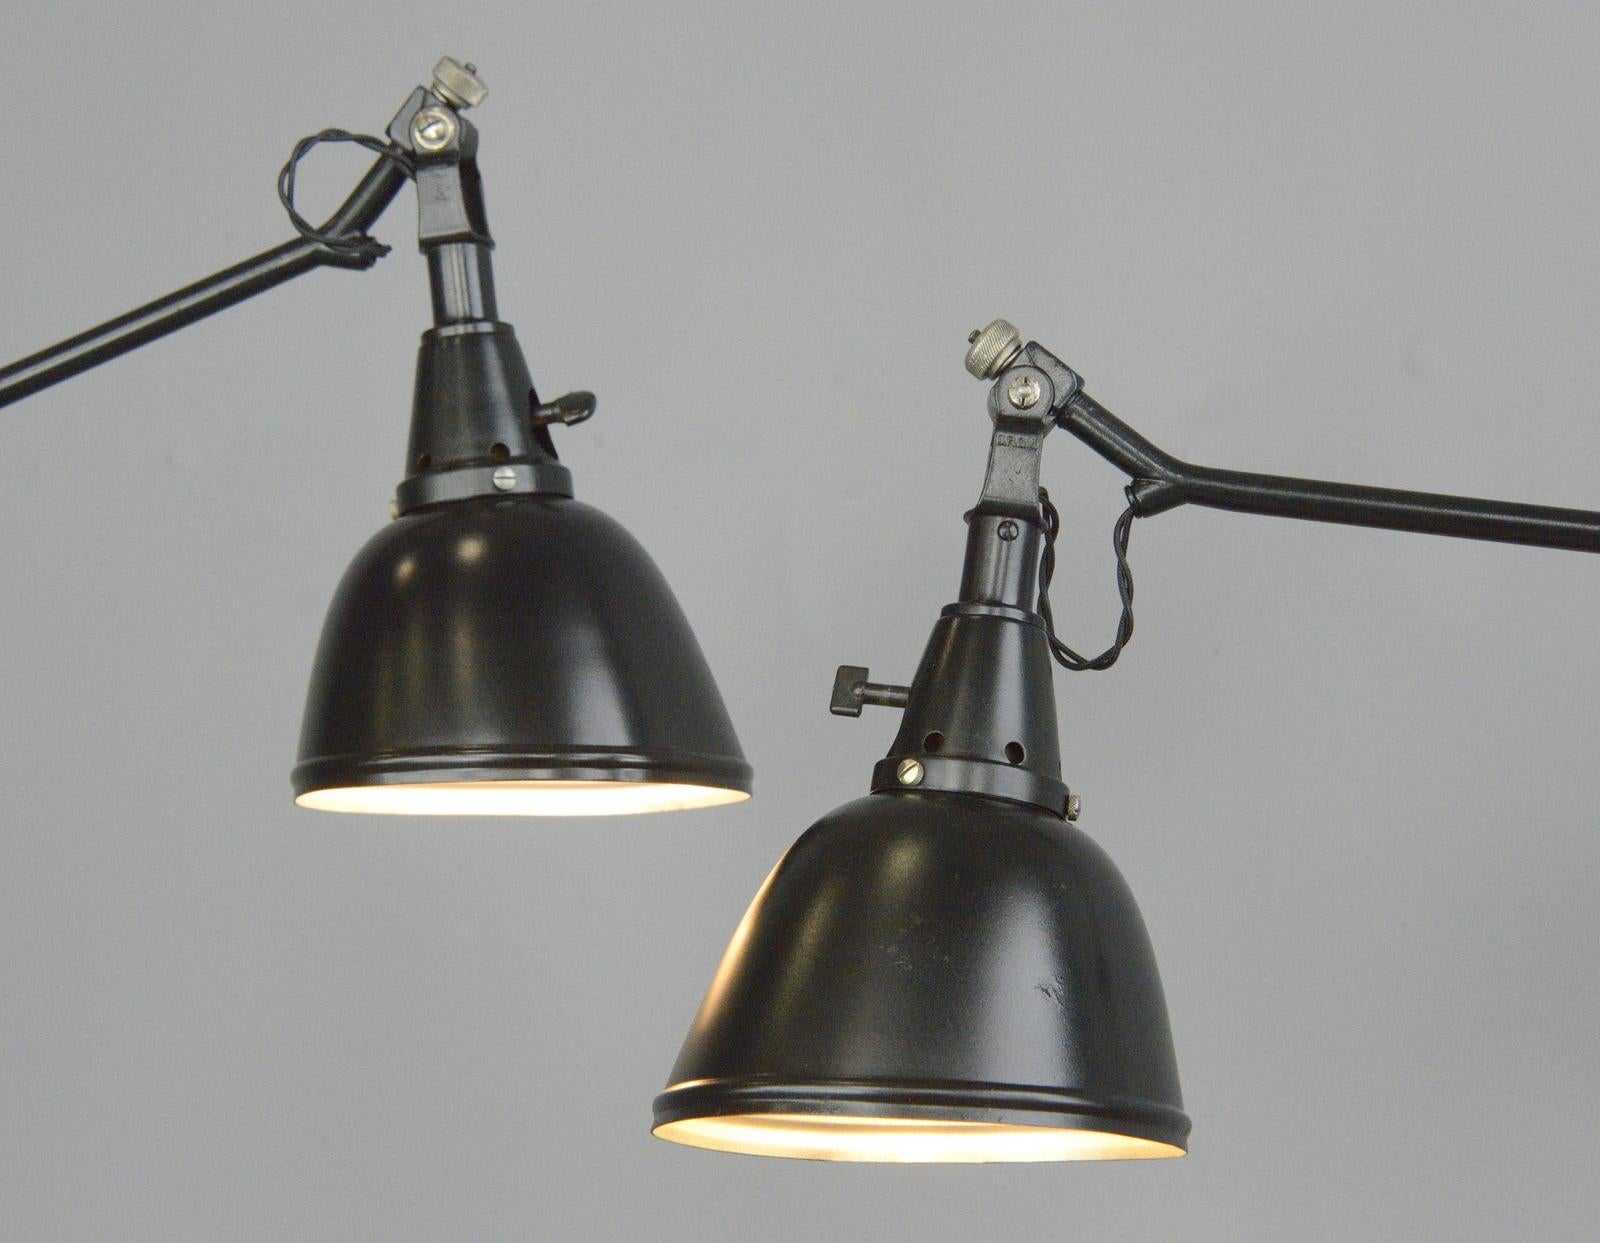 Midgard Typ 114 table lamps by Curt Fischer, circa 1930s

- Price is per lamp
- Fully articulated
- Clamp on with original Bakelite knob
- Aluminium shade
- Takes E27 fitting bulbs
- On/Off toggle switch on the head of the lamp
- Designed by